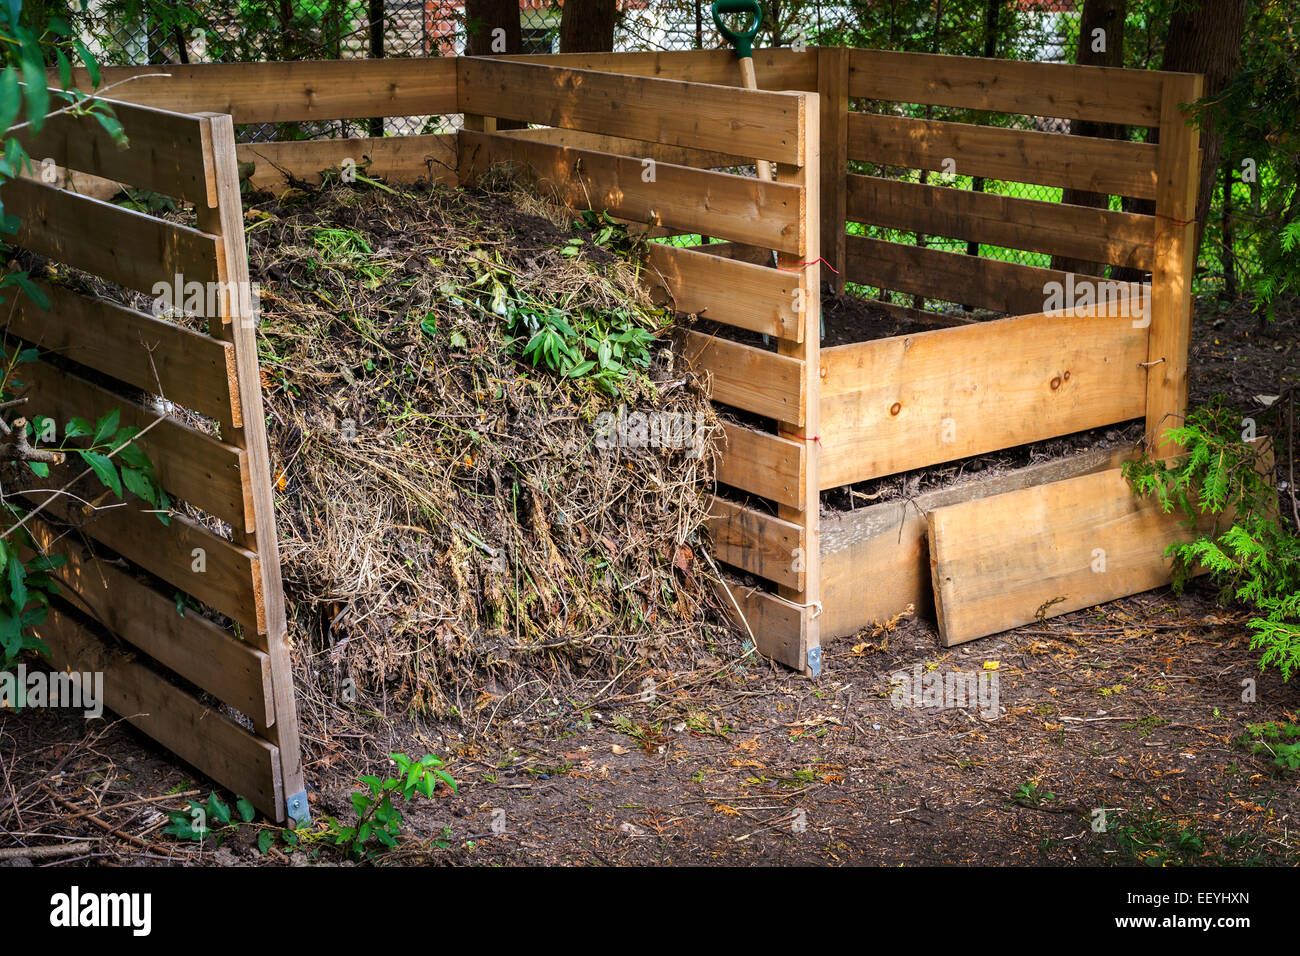 Wooden Compost Boxes With Composted Soil And Yard Waste For Garden